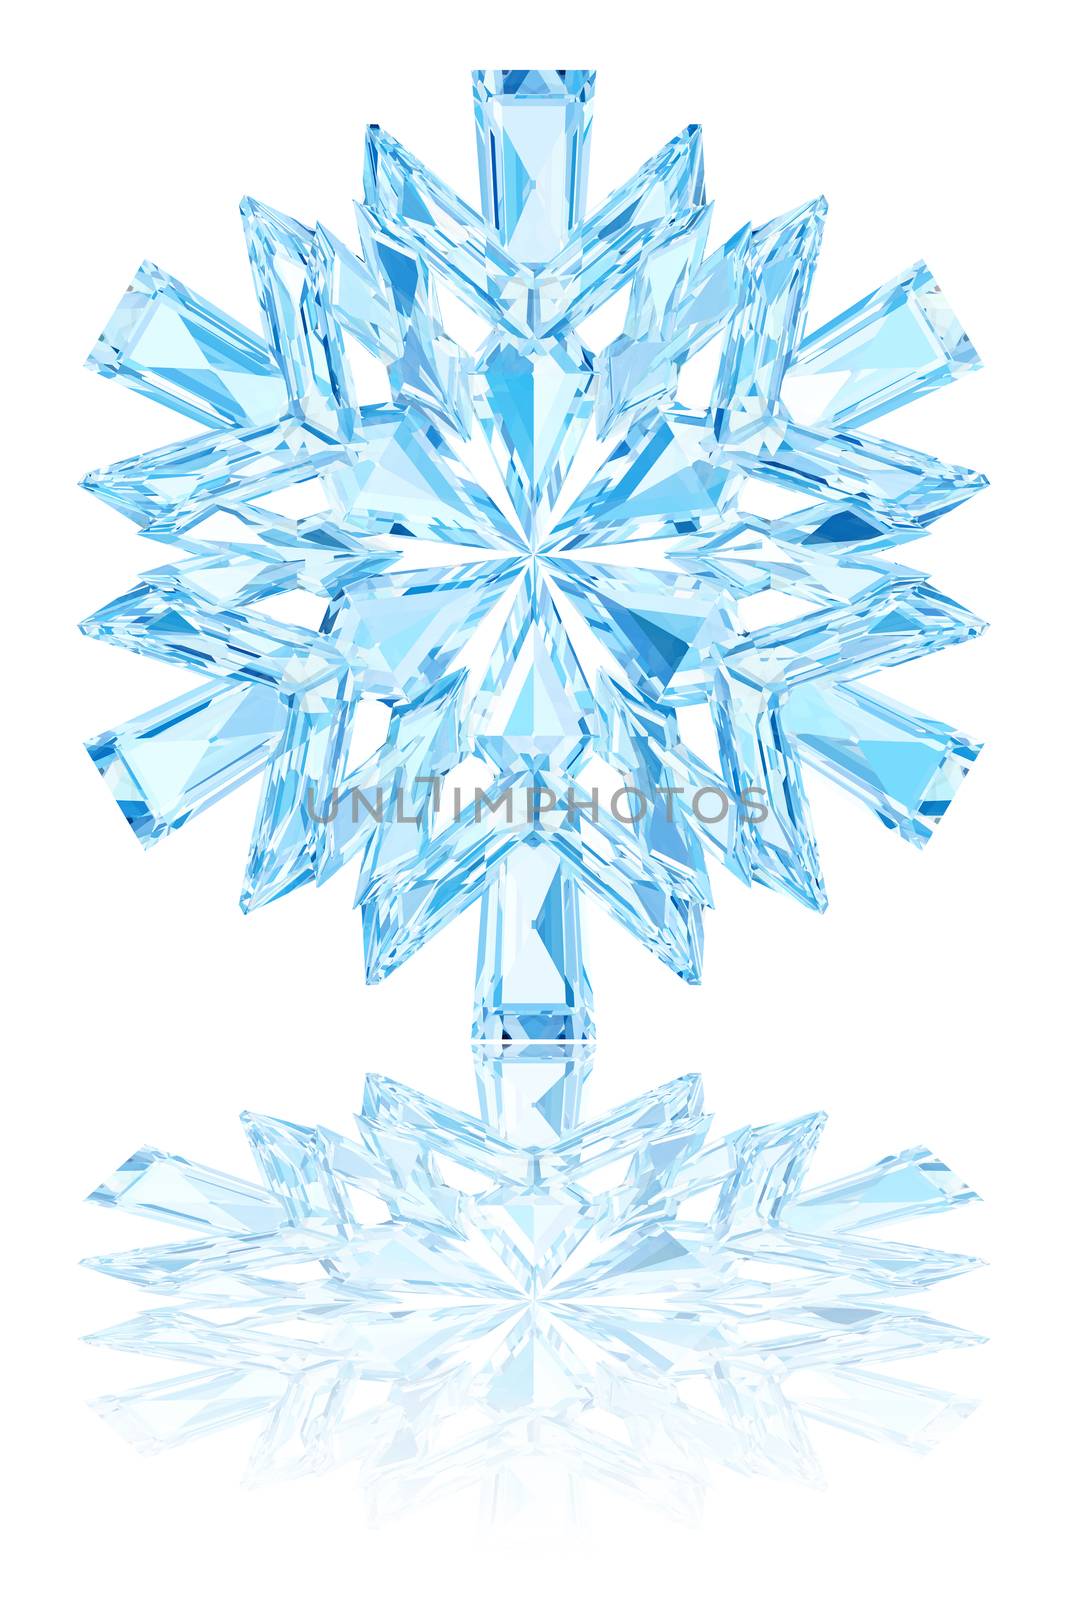 Light blue crystal snowflake on glossy white background by oneo